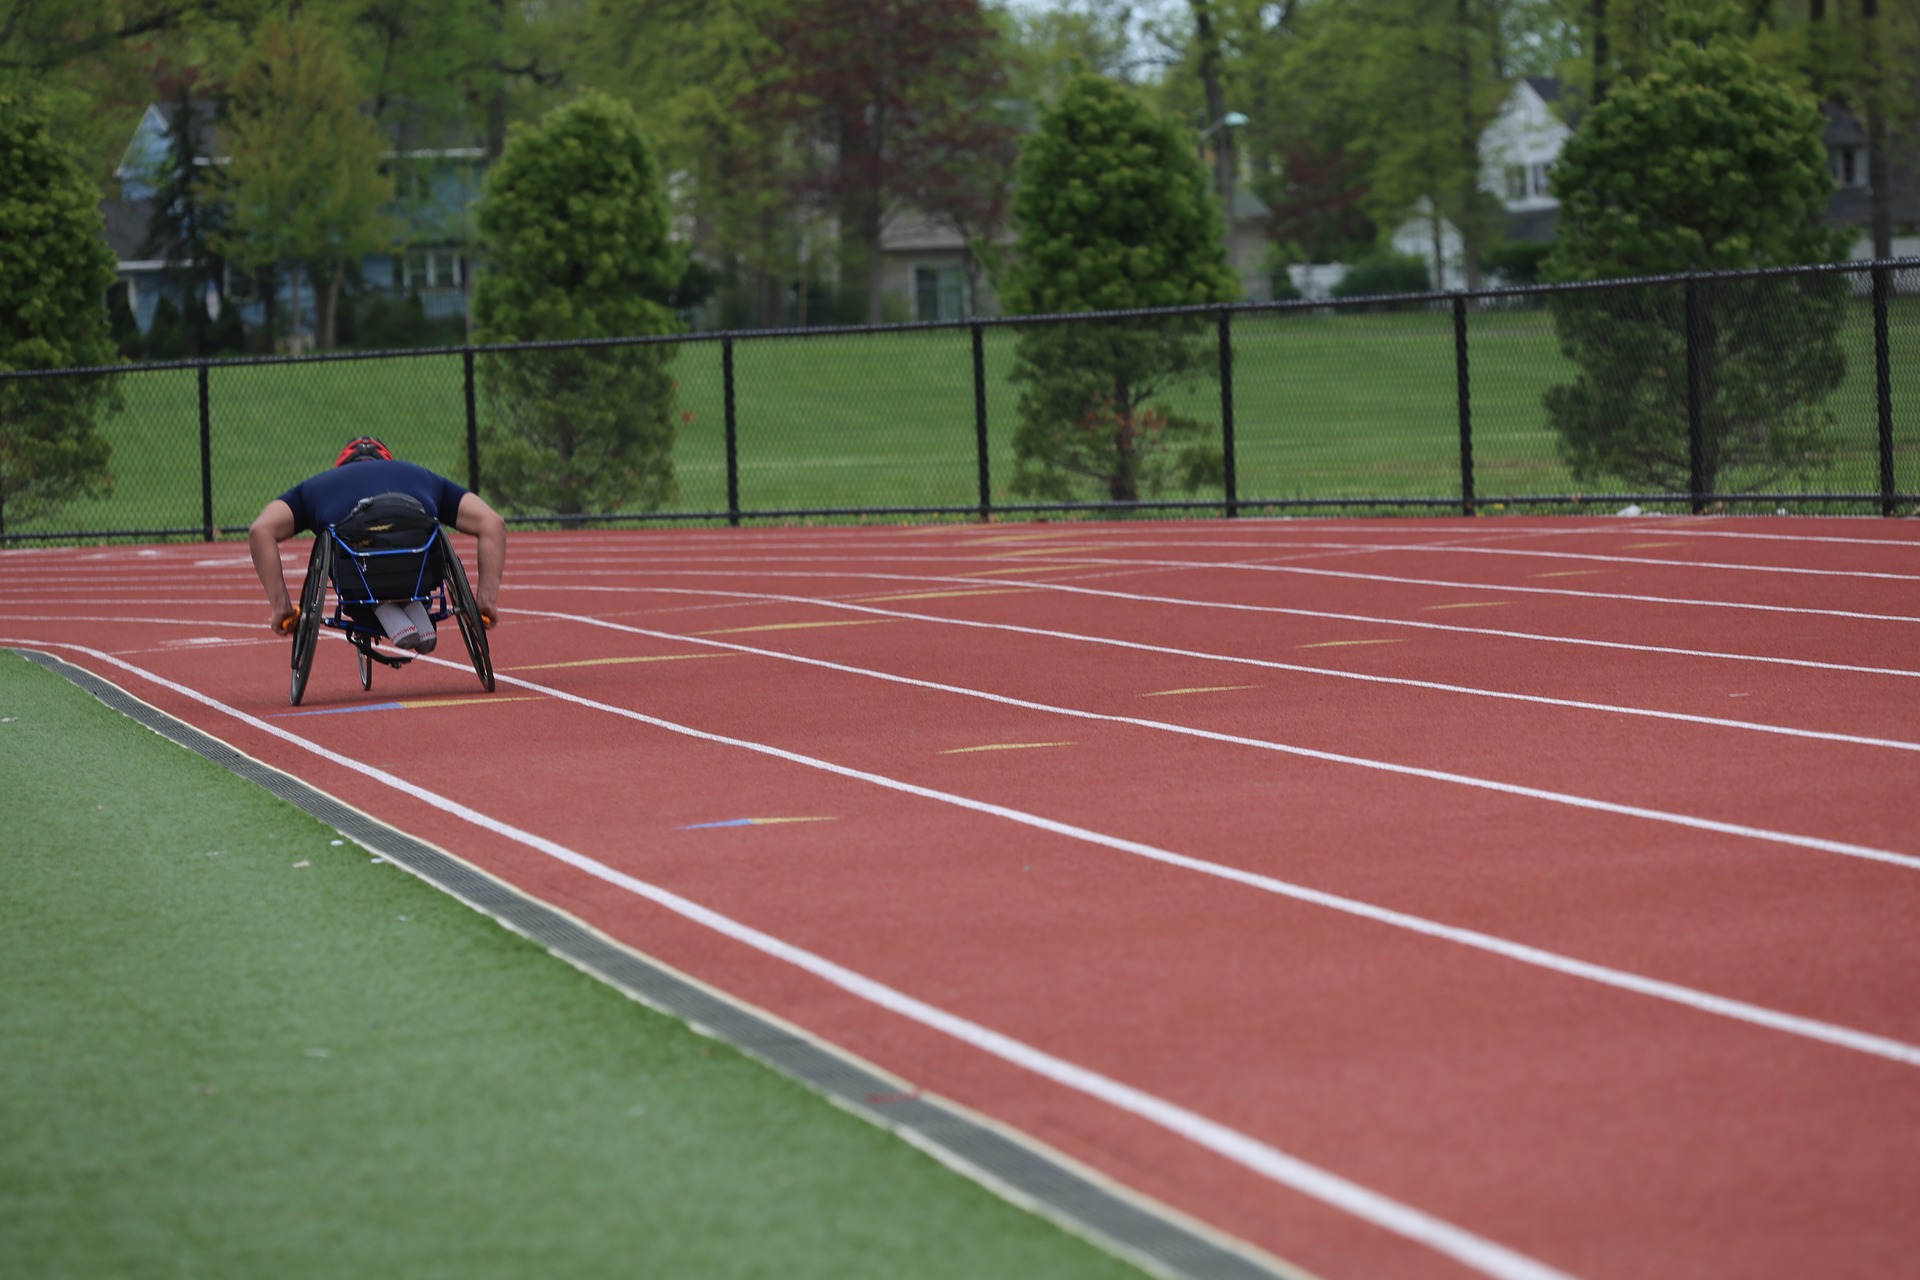 Person in wheelchair racing around track.